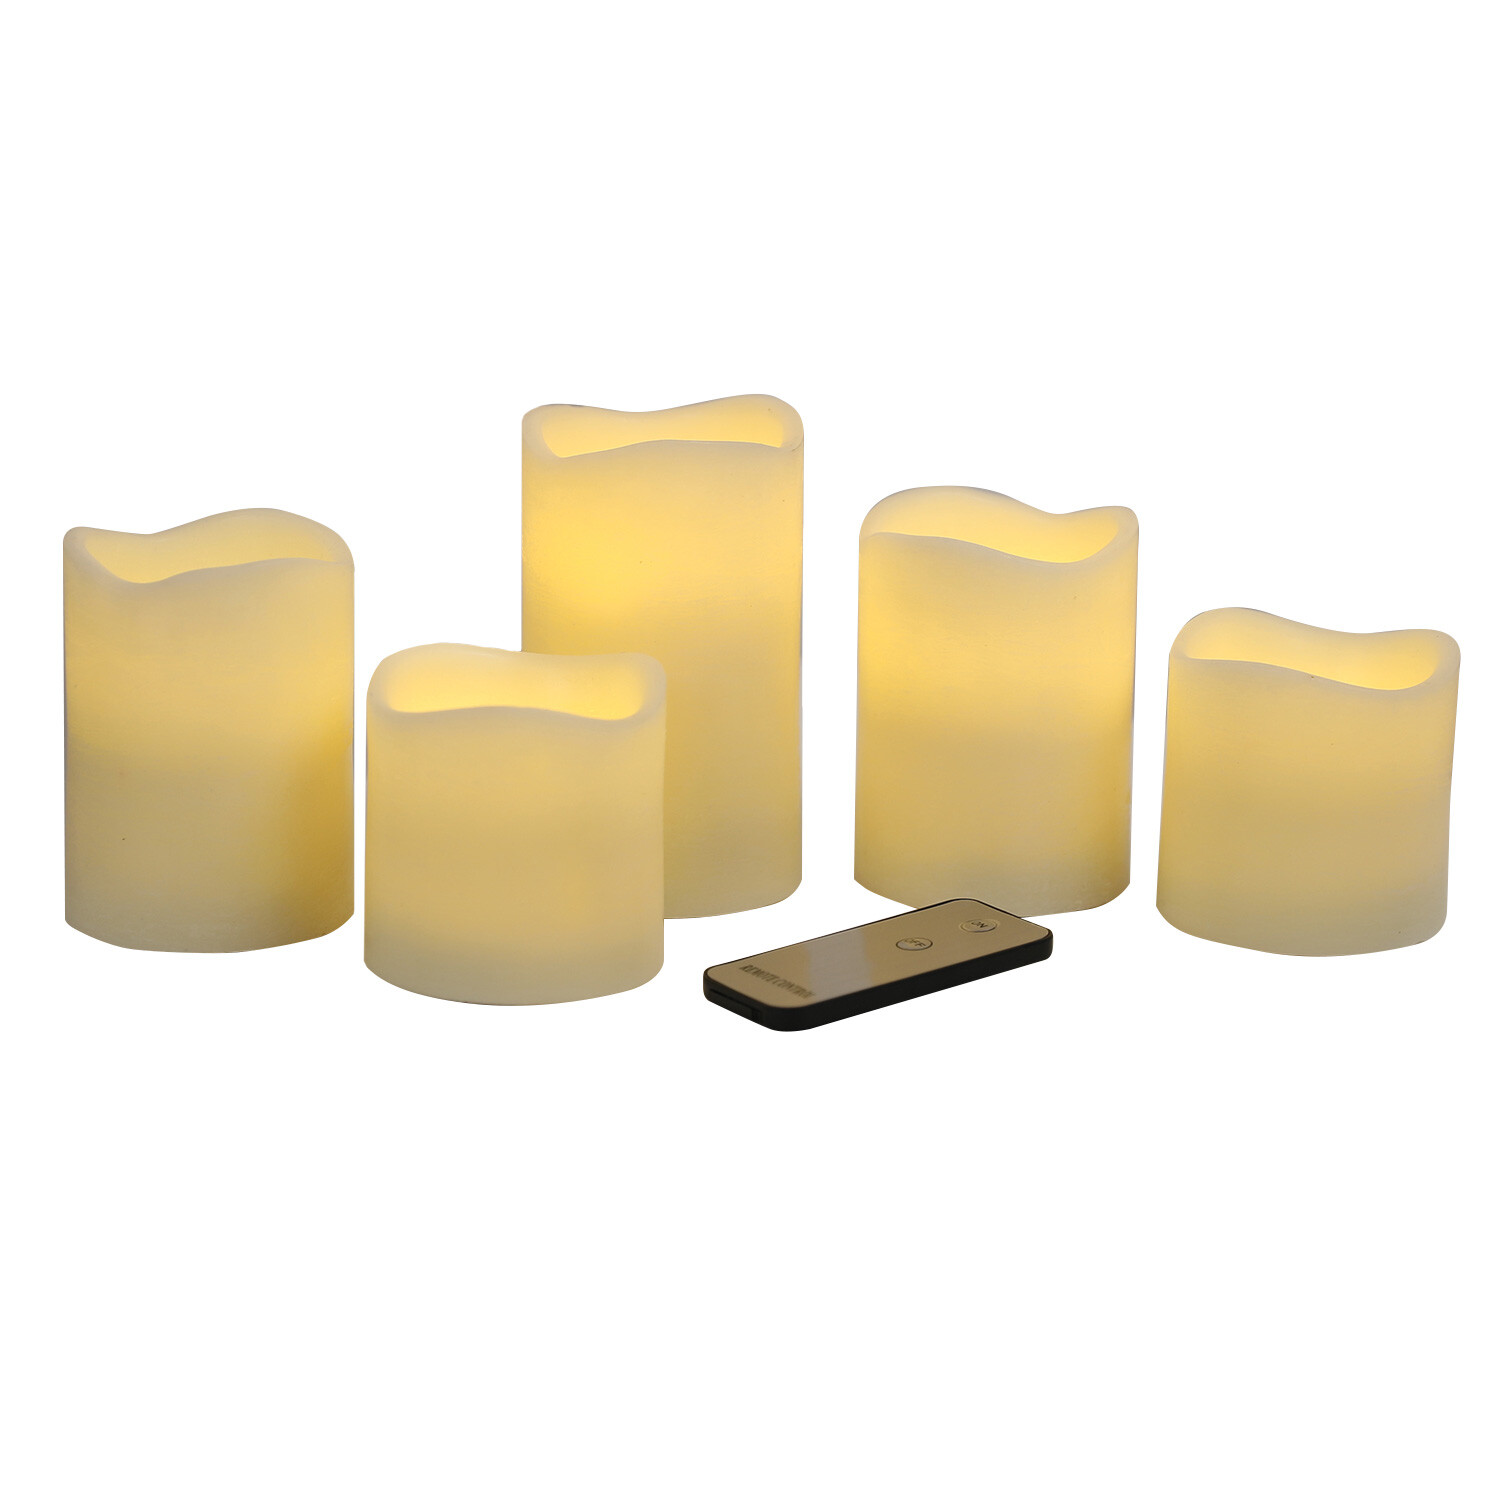 Flickering LED Candles 5 Pack Image 2